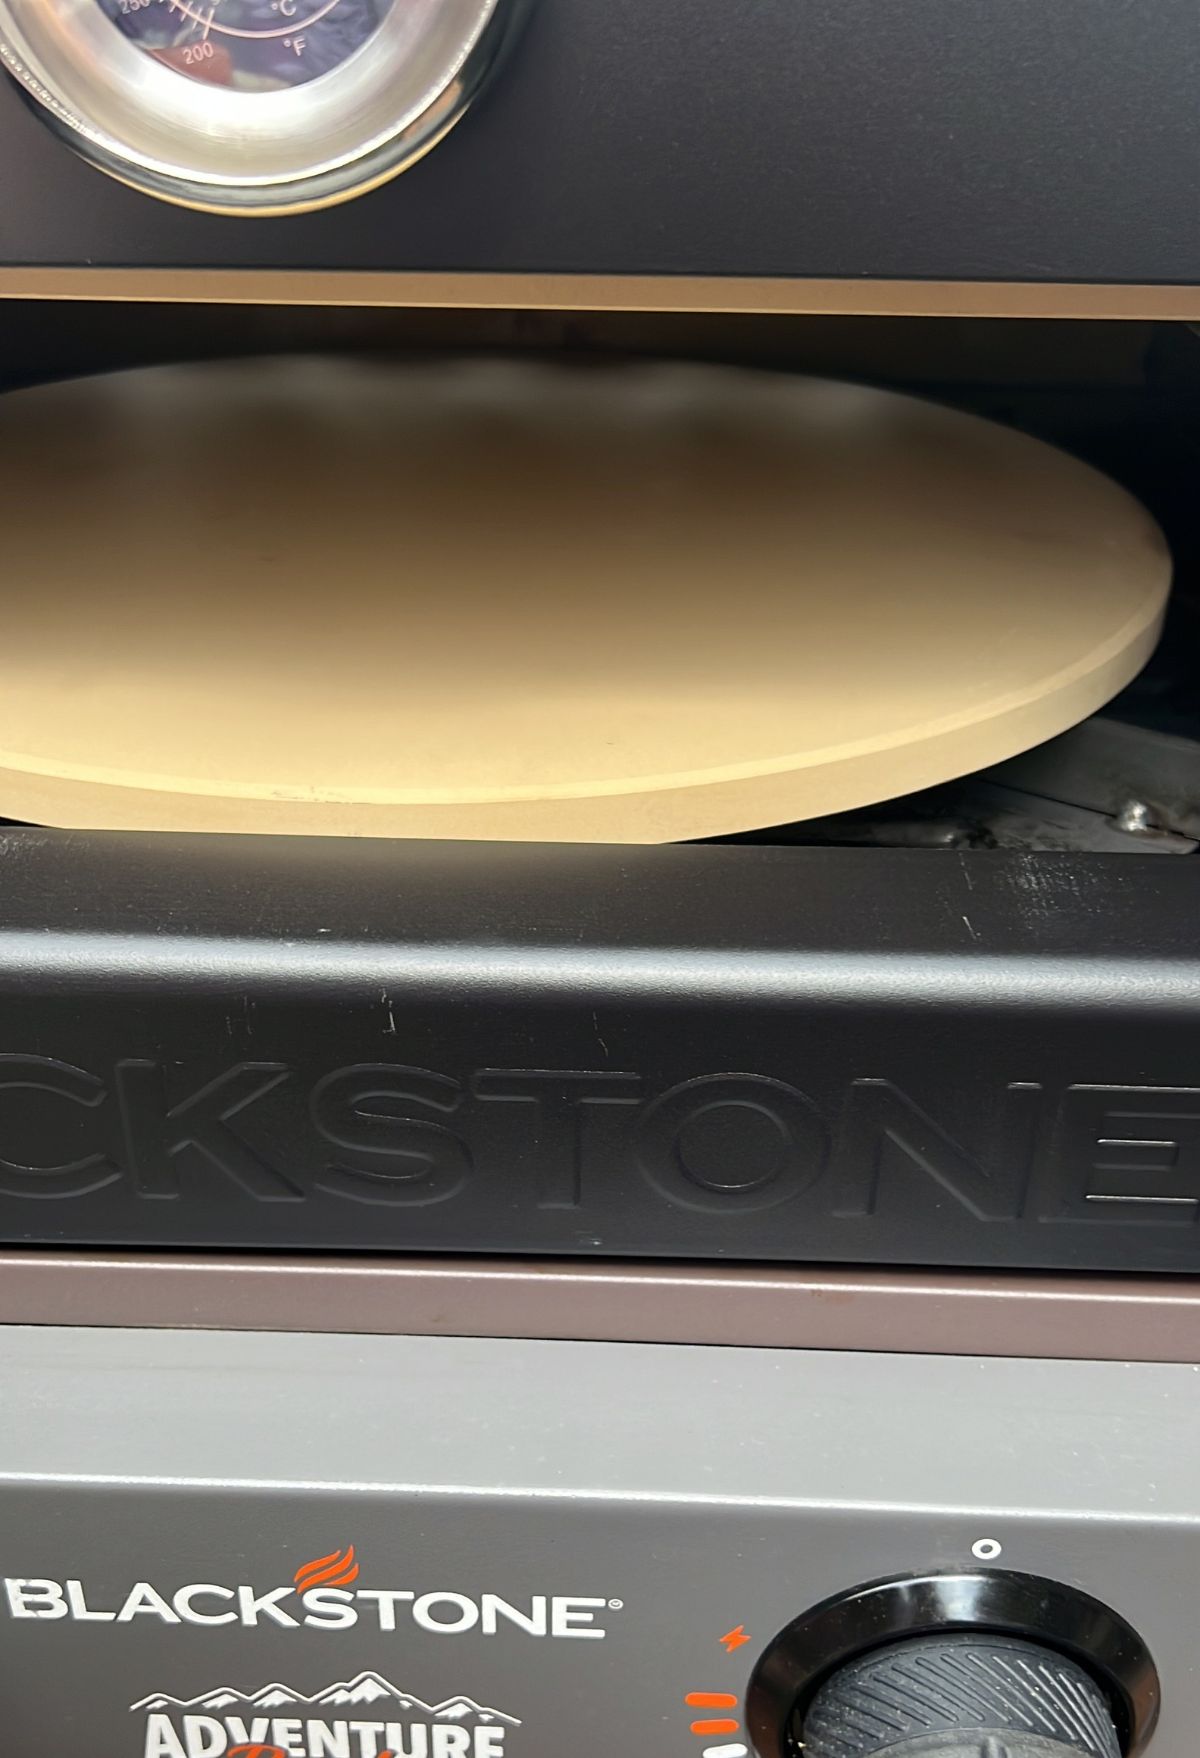 A blackstone pizza oven with a pizza on it.